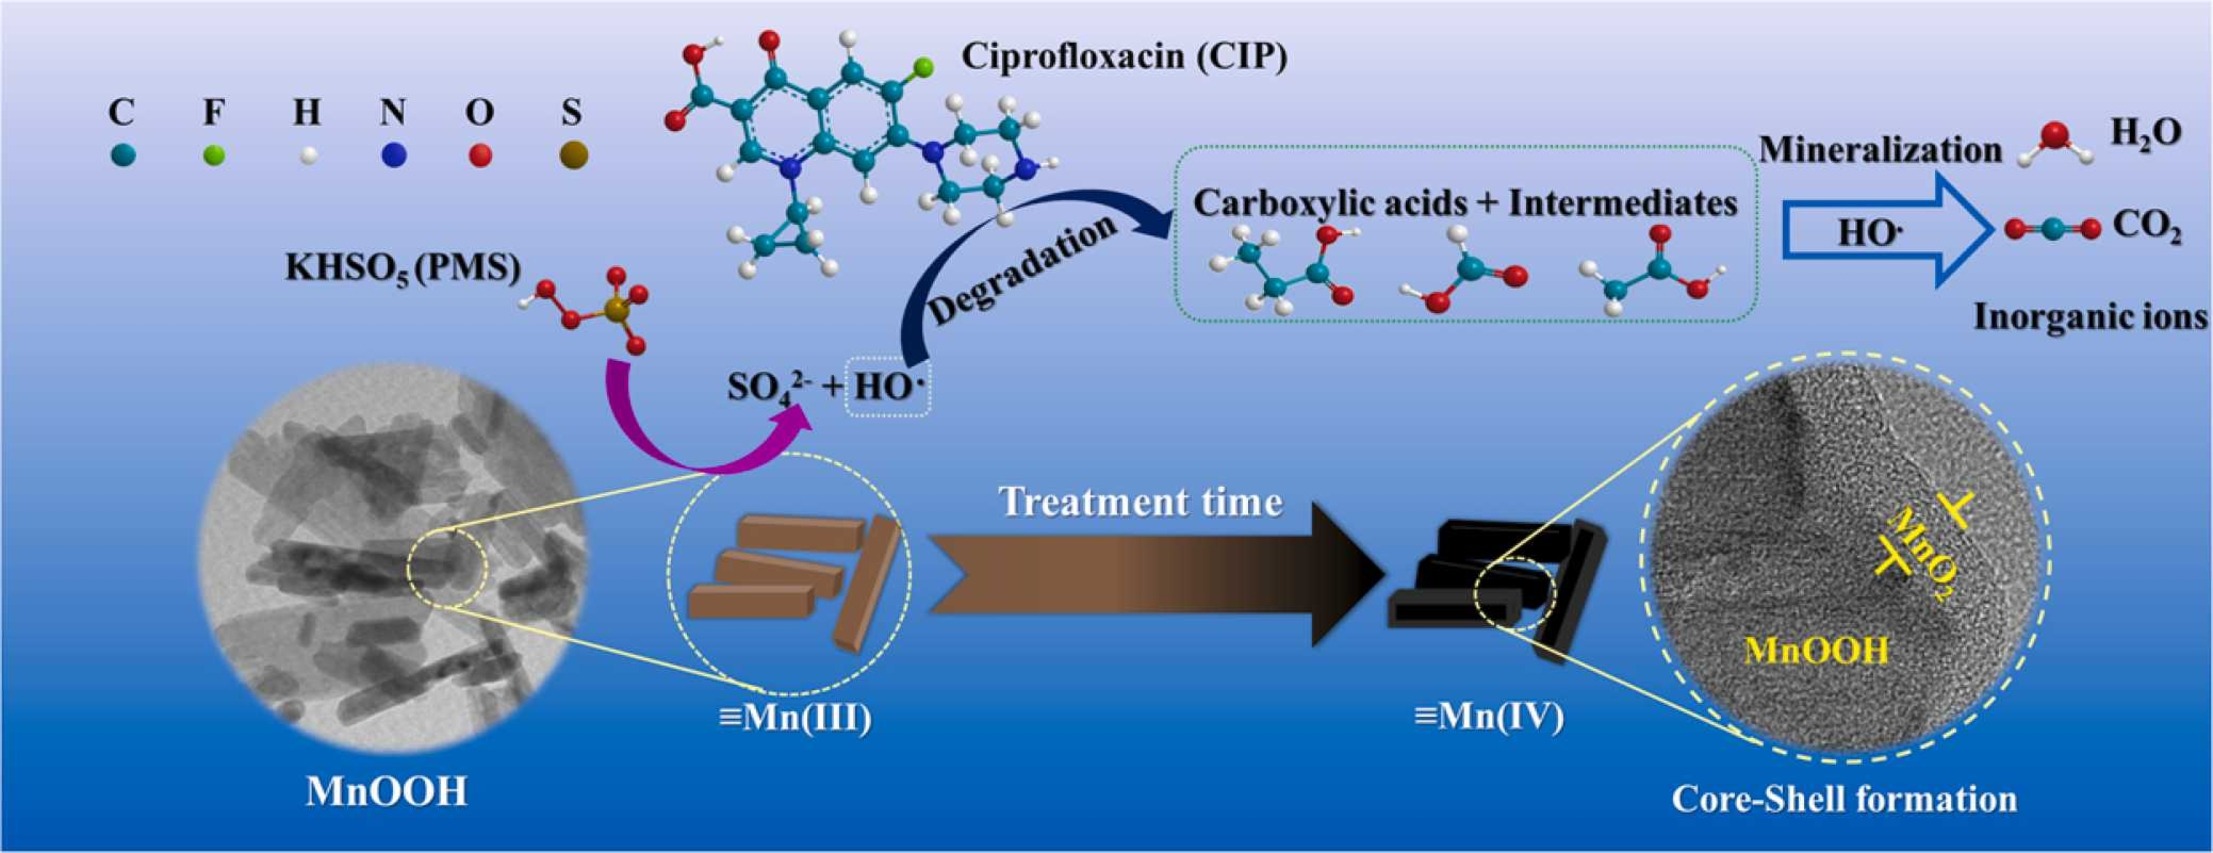 Unraveling the time evolution and post mortem changes of nanometric MnOOH during in situ oxidation of ciprofloxacin by activated peroxymonosulfate.